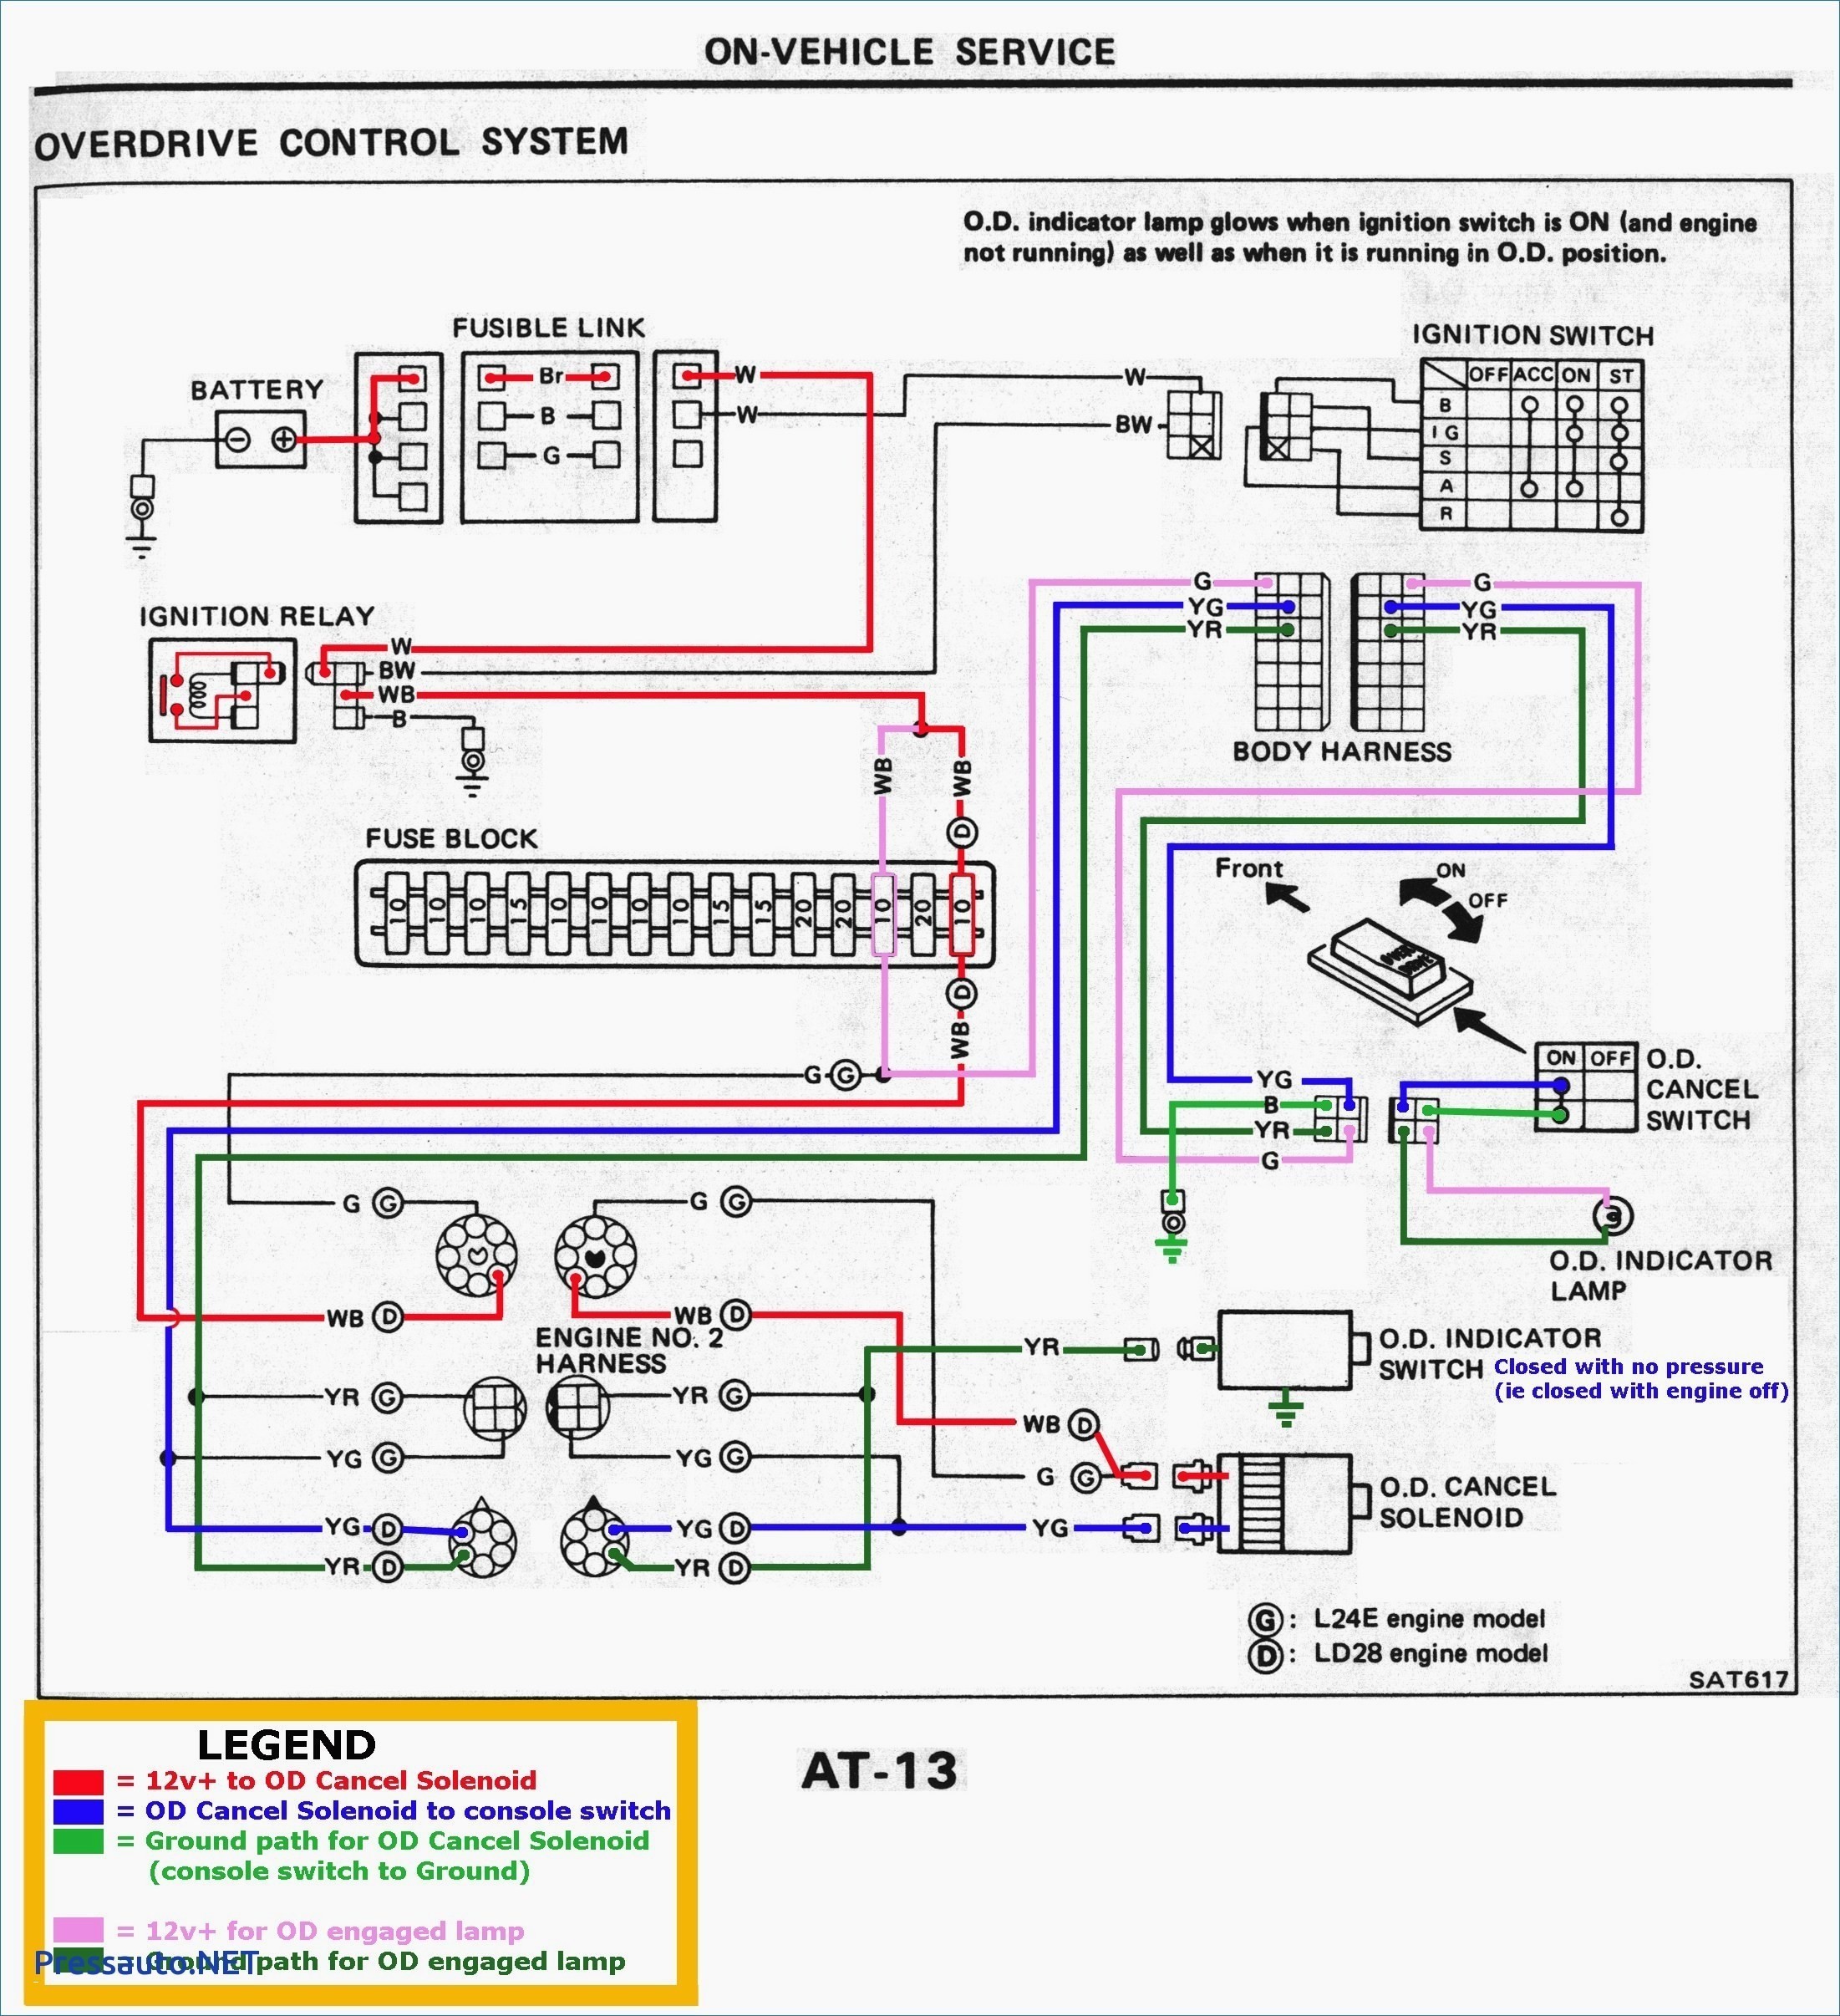 Kubota Ignition Switch Wiring Diagram New 69 Awesome Wire Diagram for Installing A solenoid Bobcat Mower